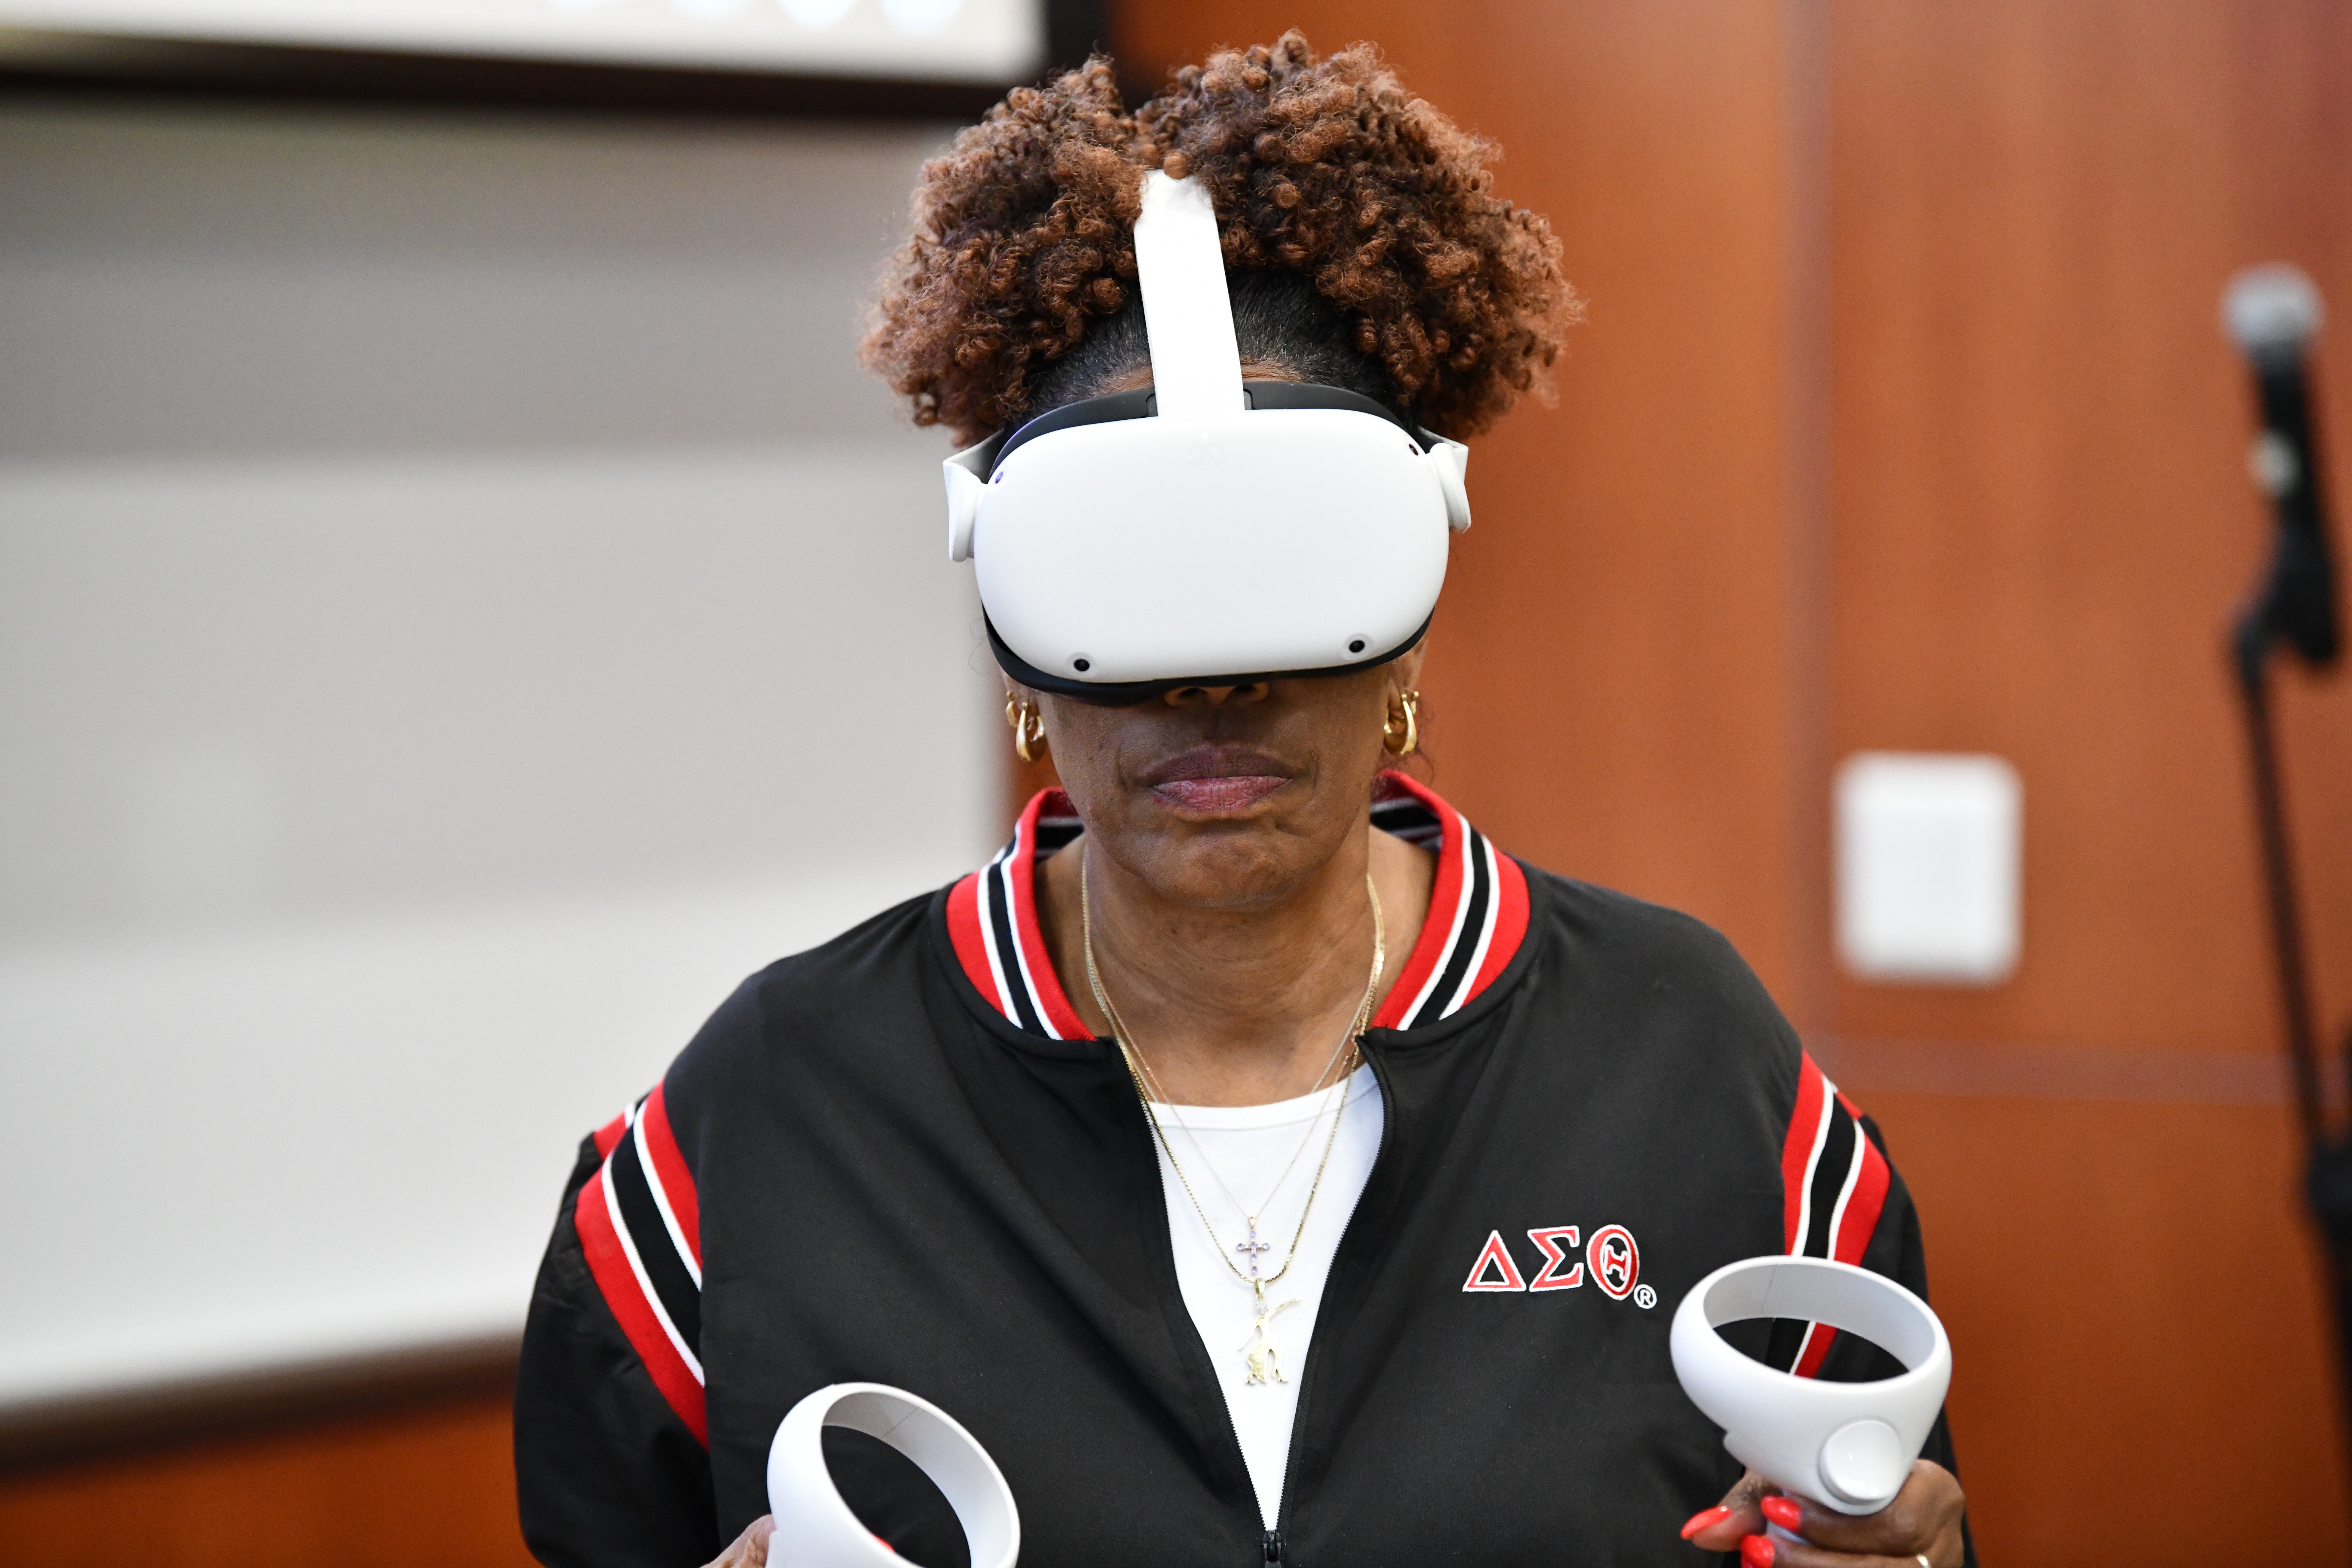 A faculty member uses a virtual reality headset and controllers